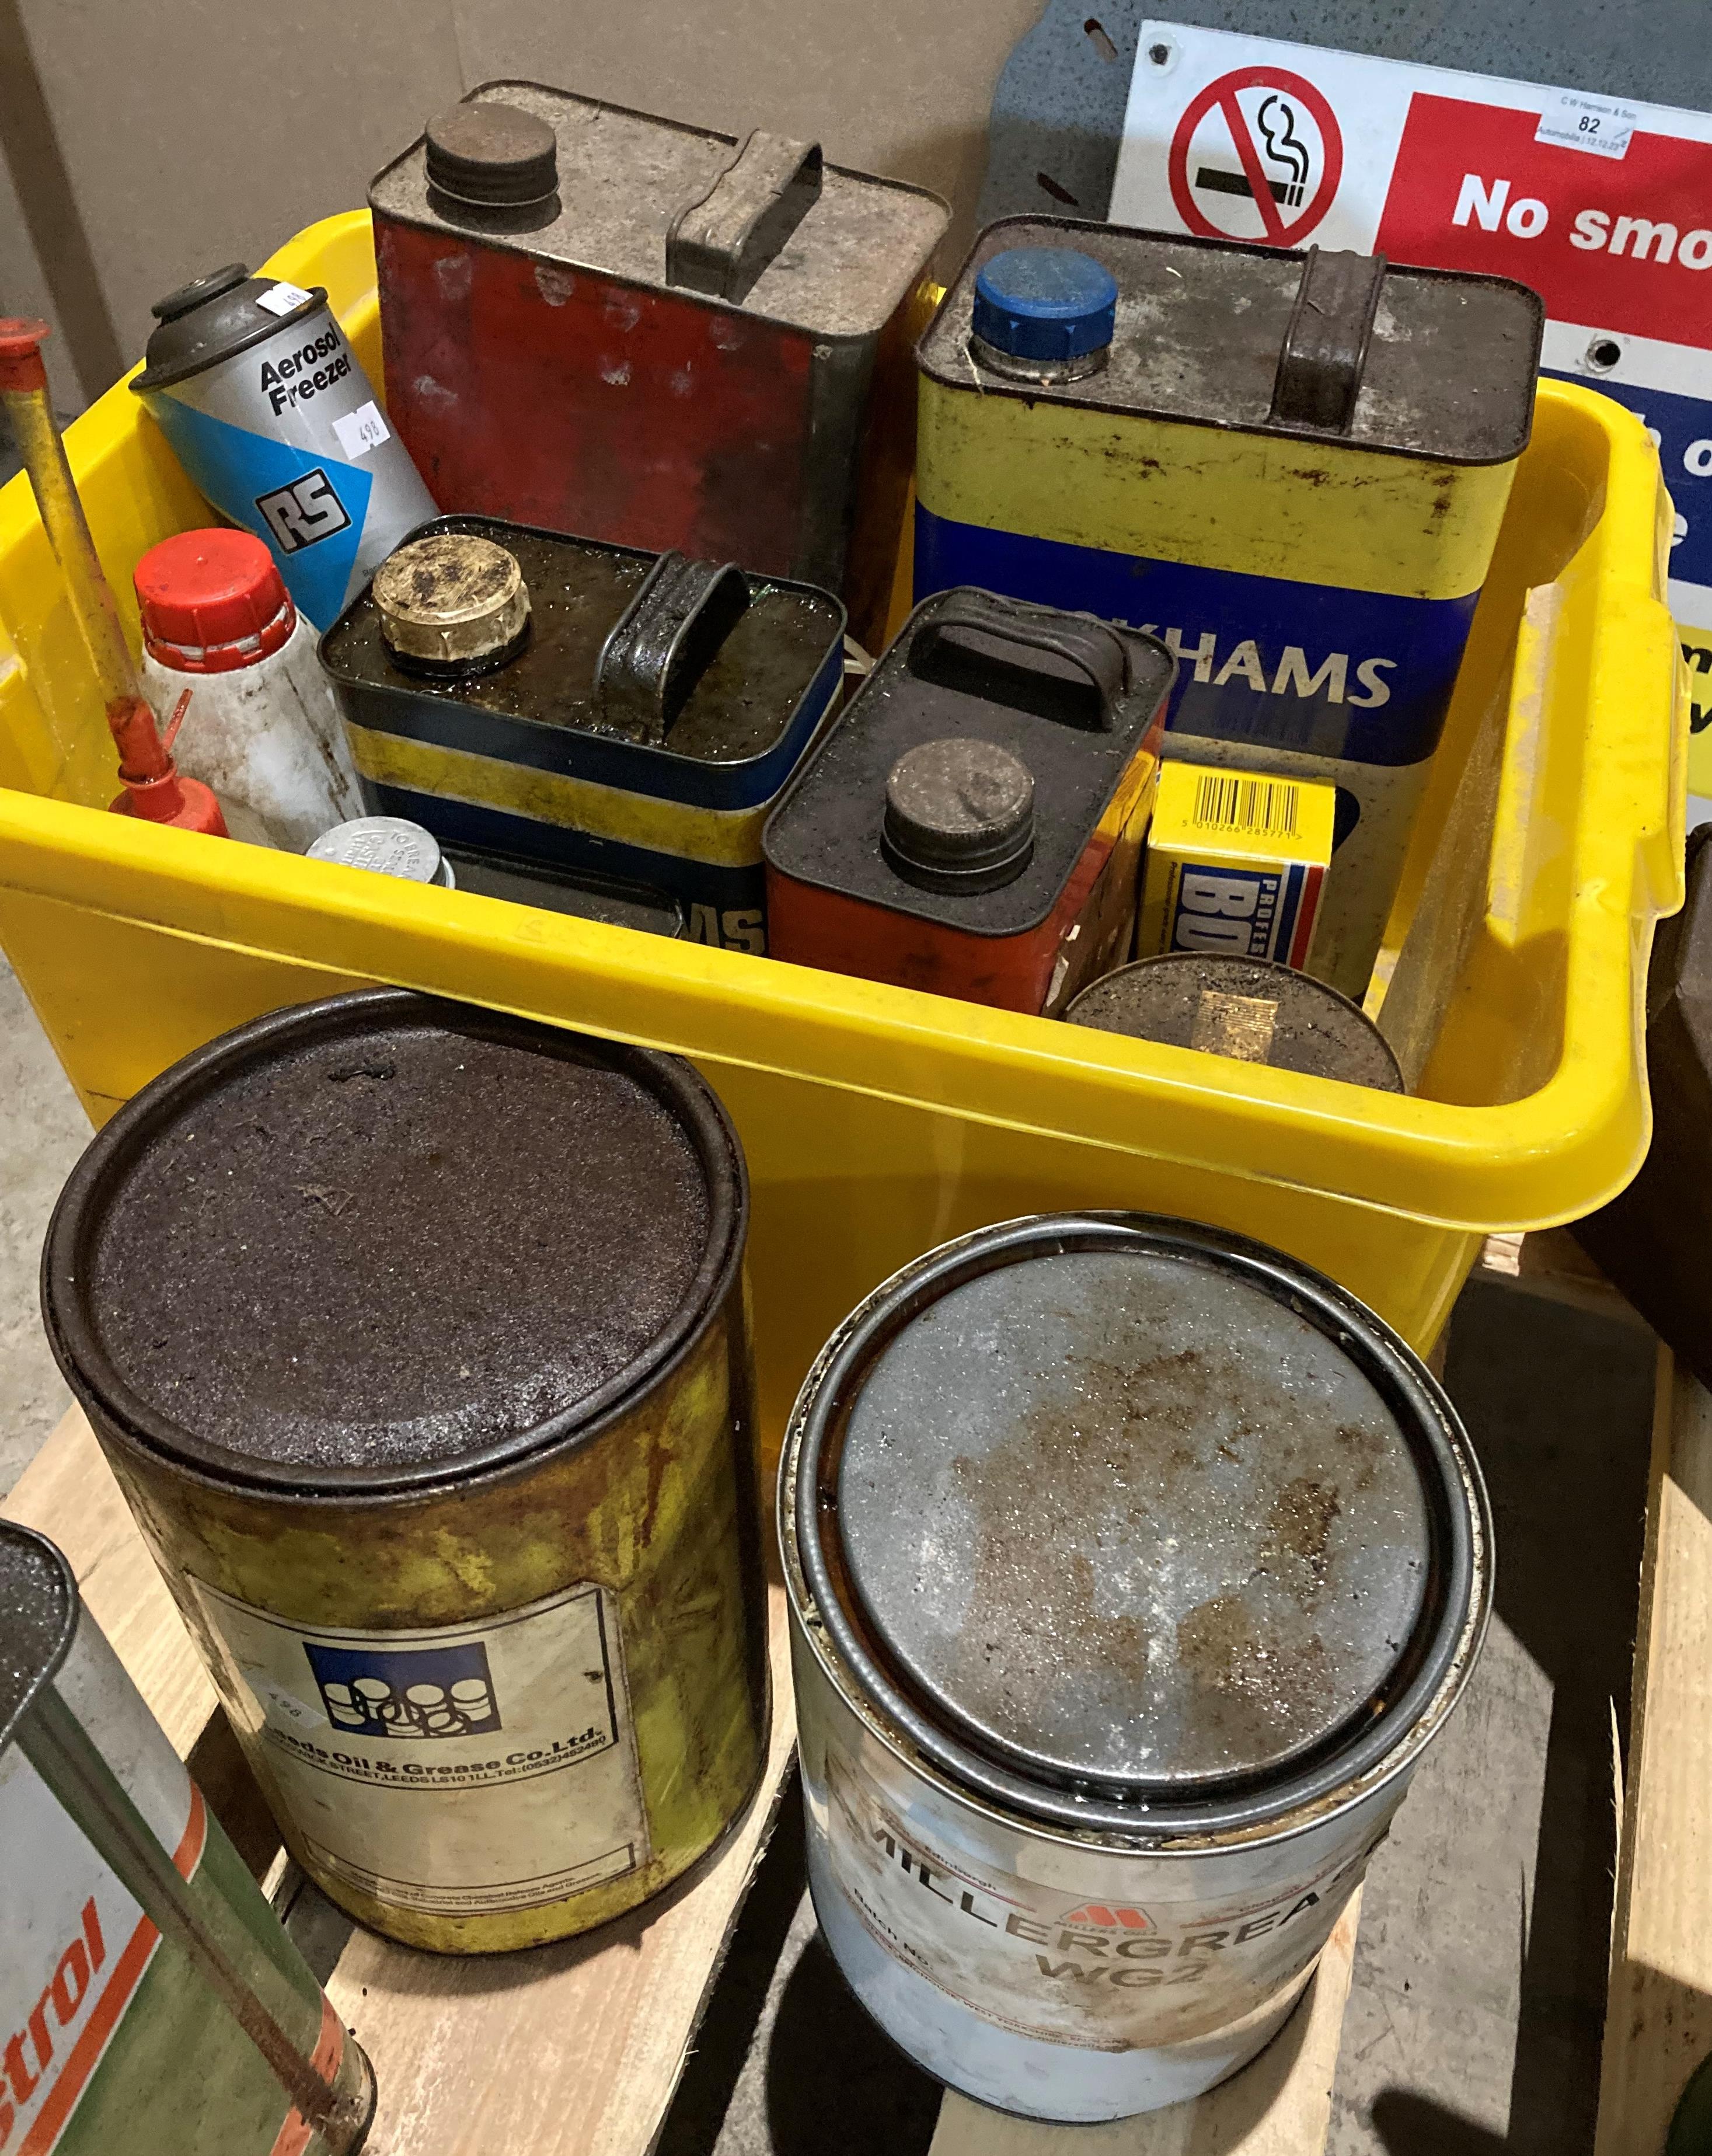 Contents to yellow tub - assorted Duckhams and Castrol oil cans (some with contents),